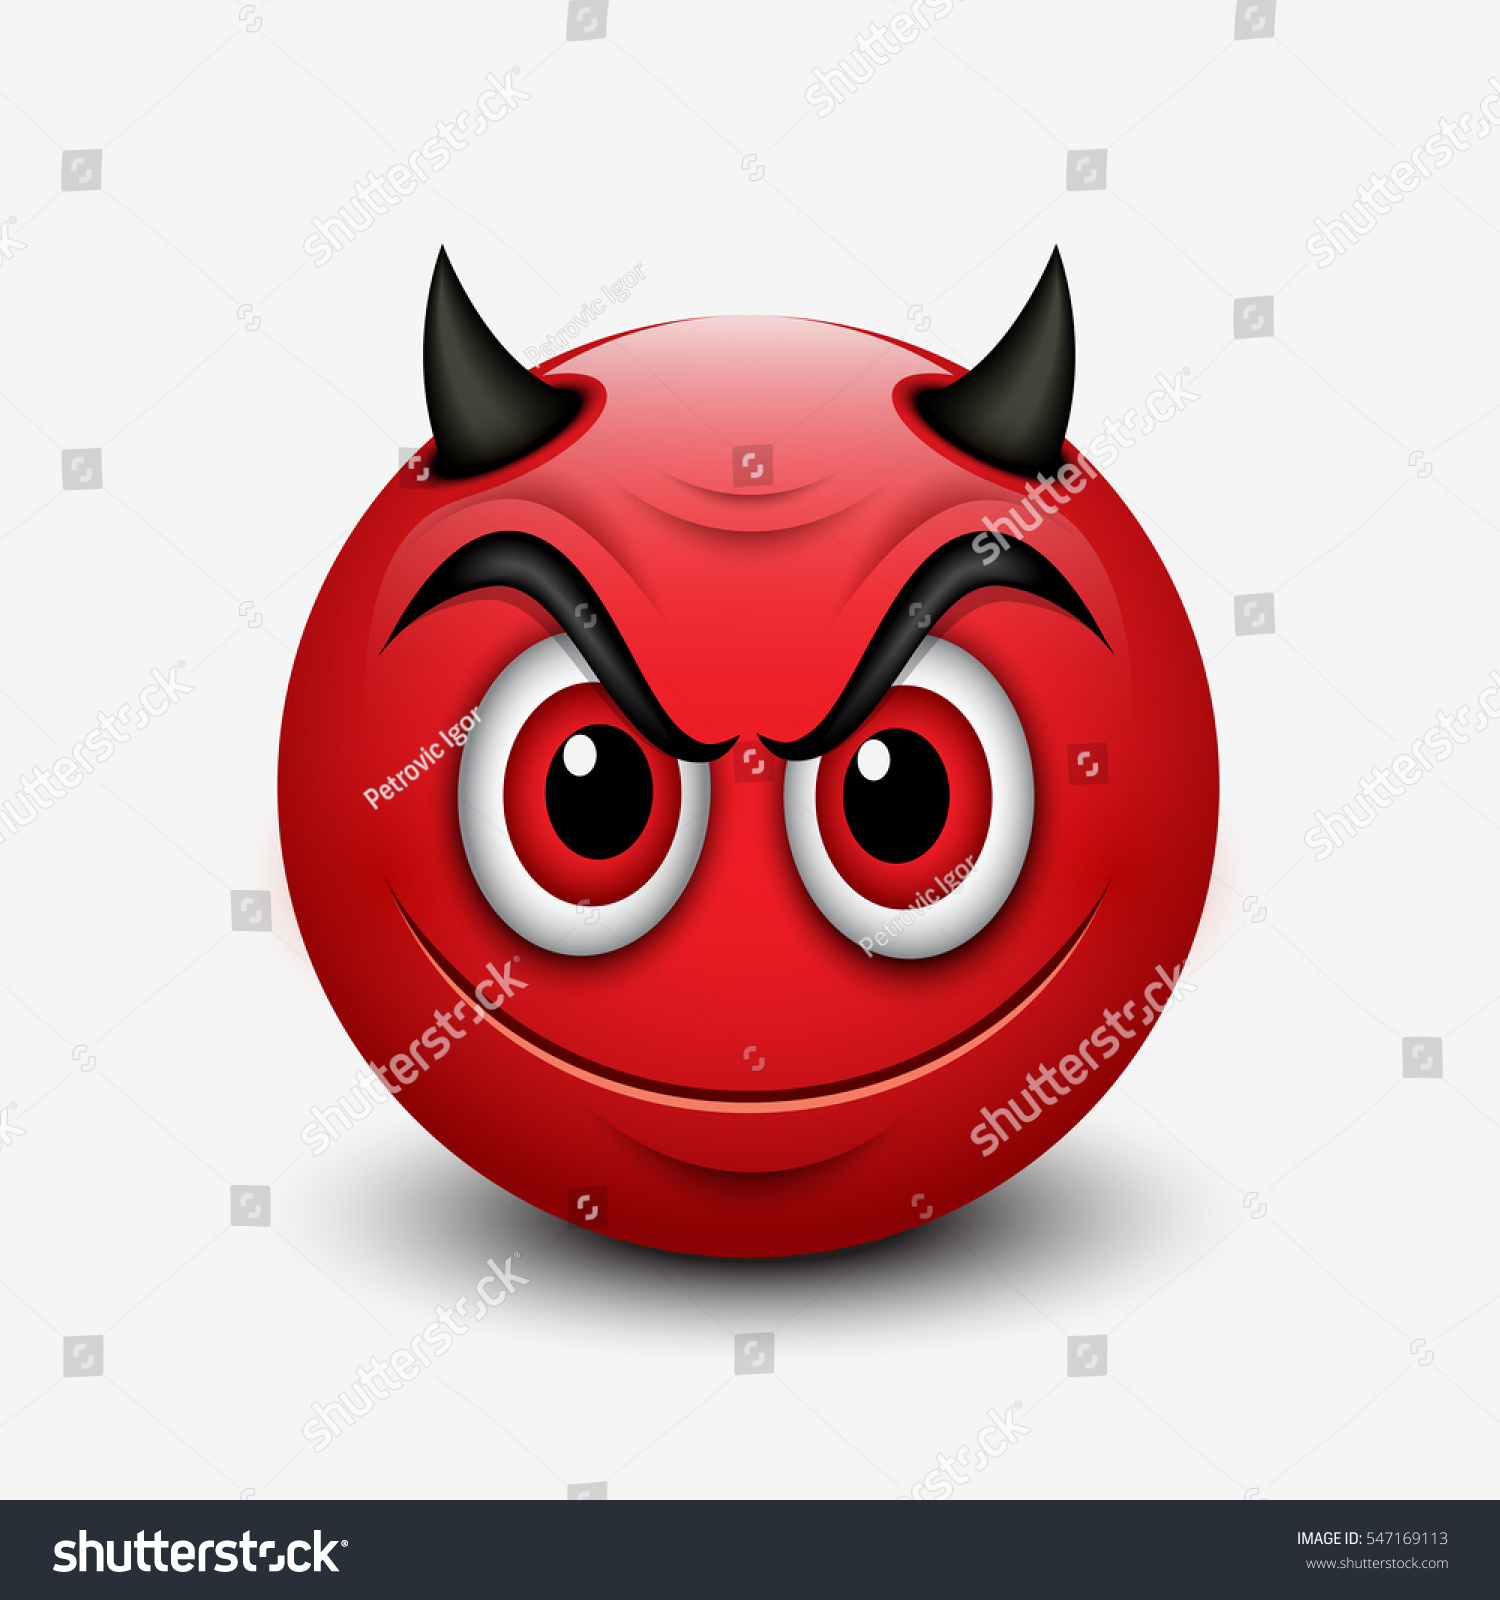 Devil Emoticon Isolated On White Background Stock Vector (Royalty Free ...